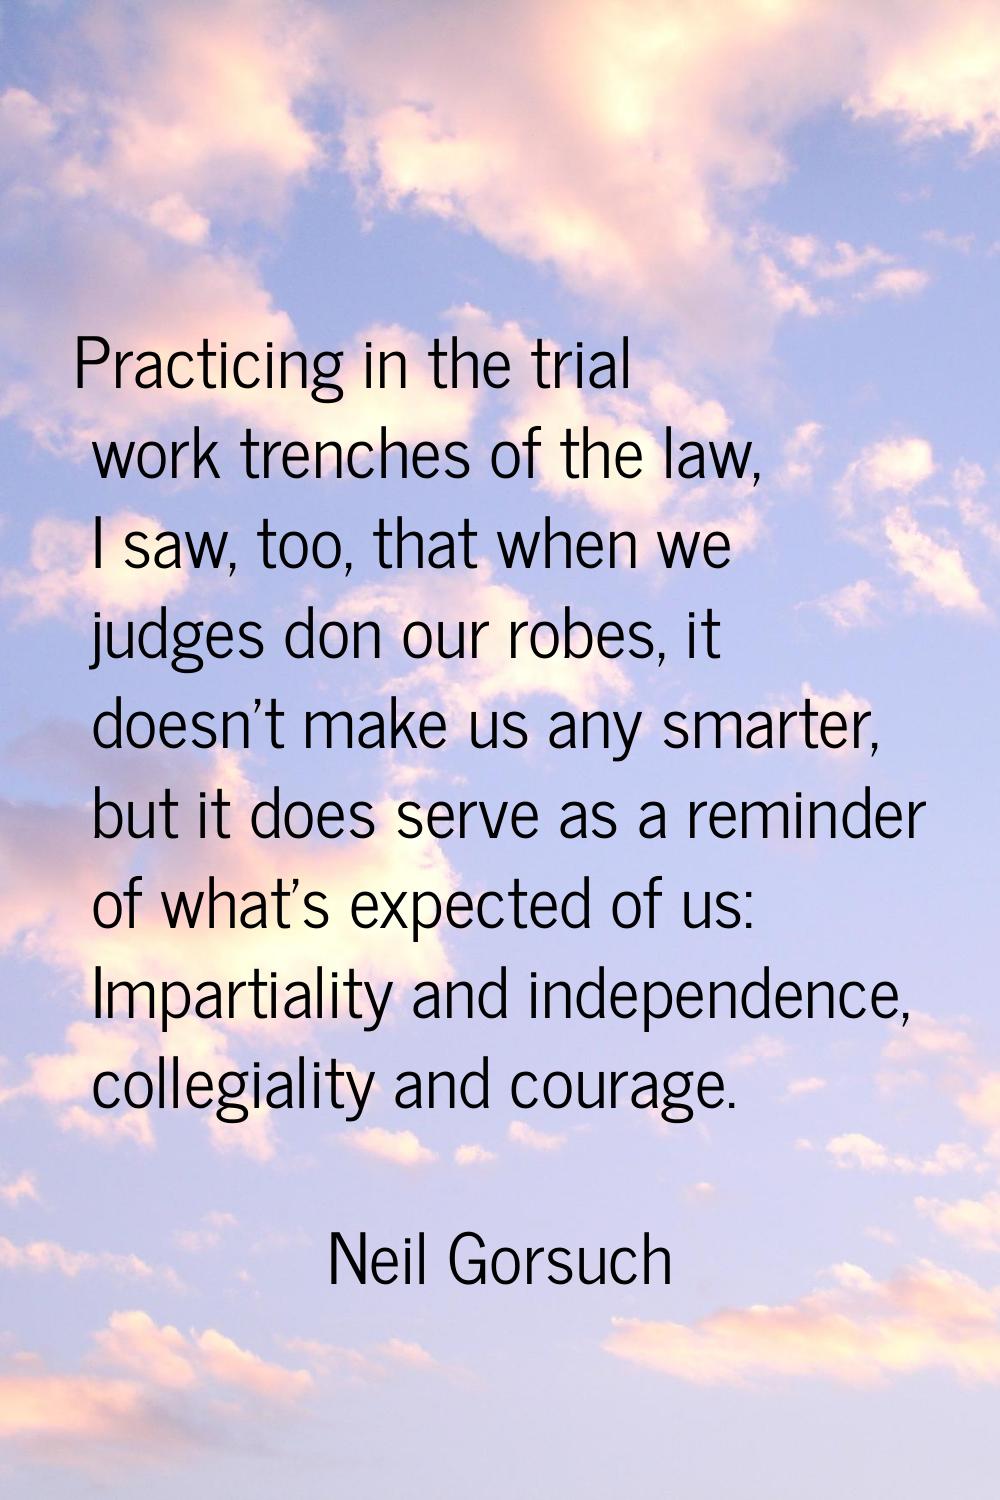 Practicing in the trial work trenches of the law, I saw, too, that when we judges don our robes, it